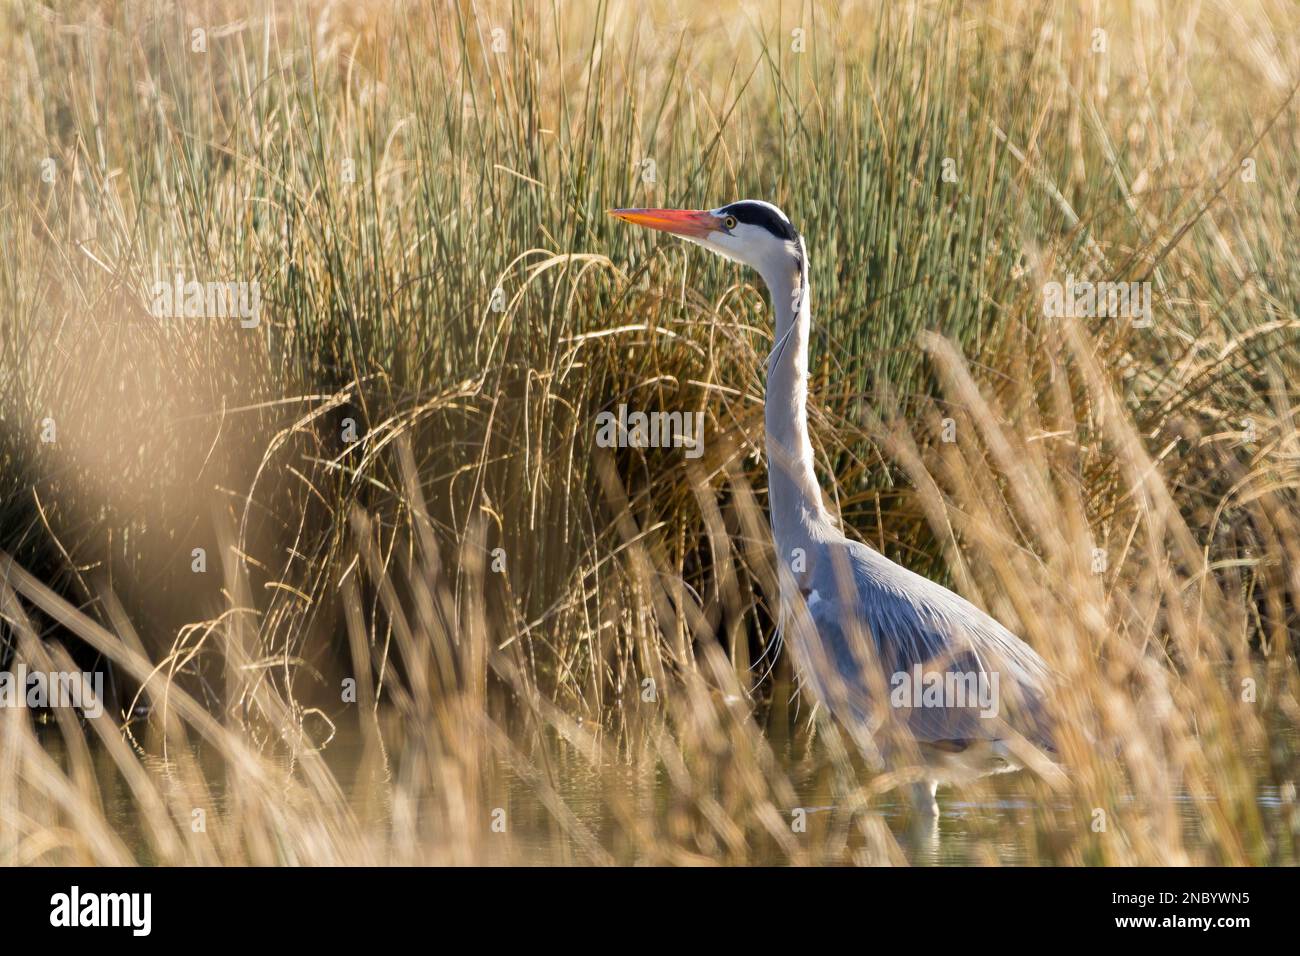 Grey heron Ardea cinerea, large wader long legs grey back and wings long white neck with black markings yellow dagger like bill black crest on head Stock Photo